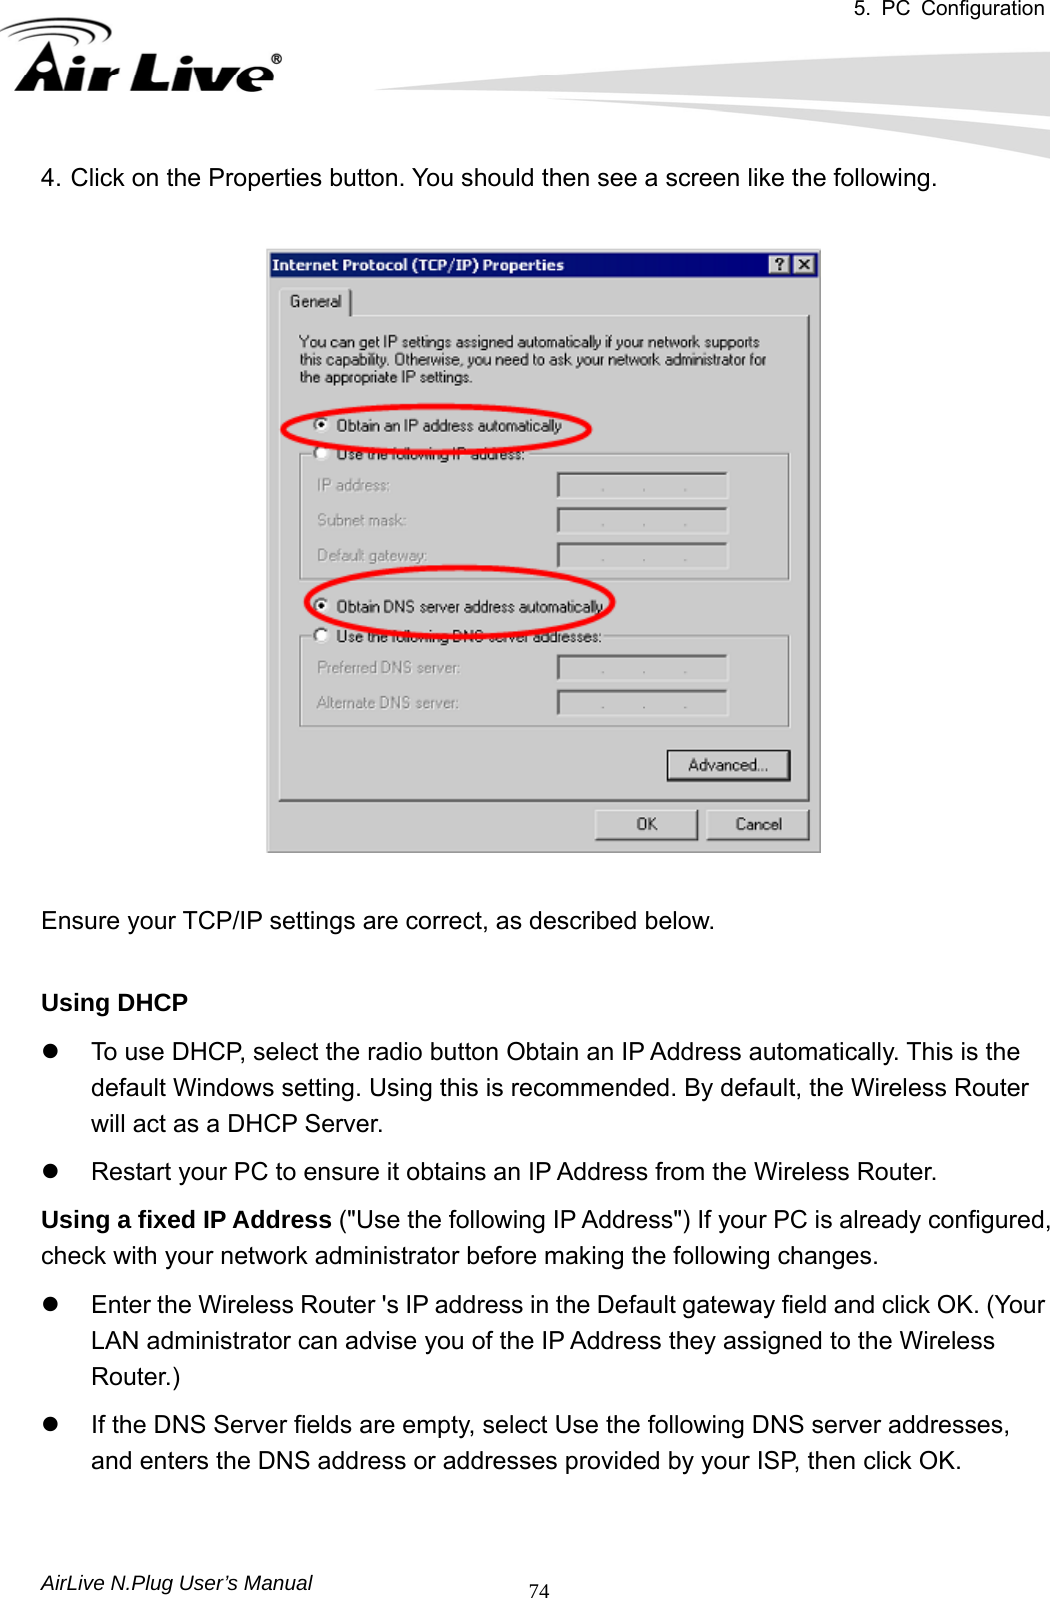 5. PC Configuration       AirLive N.Plug User’s Manual  744. Click on the Properties button. You should then see a screen like the following.    Ensure your TCP/IP settings are correct, as described below.    Using DHCP   z  To use DHCP, select the radio button Obtain an IP Address automatically. This is the default Windows setting. Using this is recommended. By default, the Wireless Router will act as a DHCP Server.   z  Restart your PC to ensure it obtains an IP Address from the Wireless Router.   Using a fixed IP Address (&quot;Use the following IP Address&quot;) If your PC is already configured, check with your network administrator before making the following changes.   z  Enter the Wireless Router &apos;s IP address in the Default gateway field and click OK. (Your LAN administrator can advise you of the IP Address they assigned to the Wireless Router.)  z  If the DNS Server fields are empty, select Use the following DNS server addresses, and enters the DNS address or addresses provided by your ISP, then click OK.   